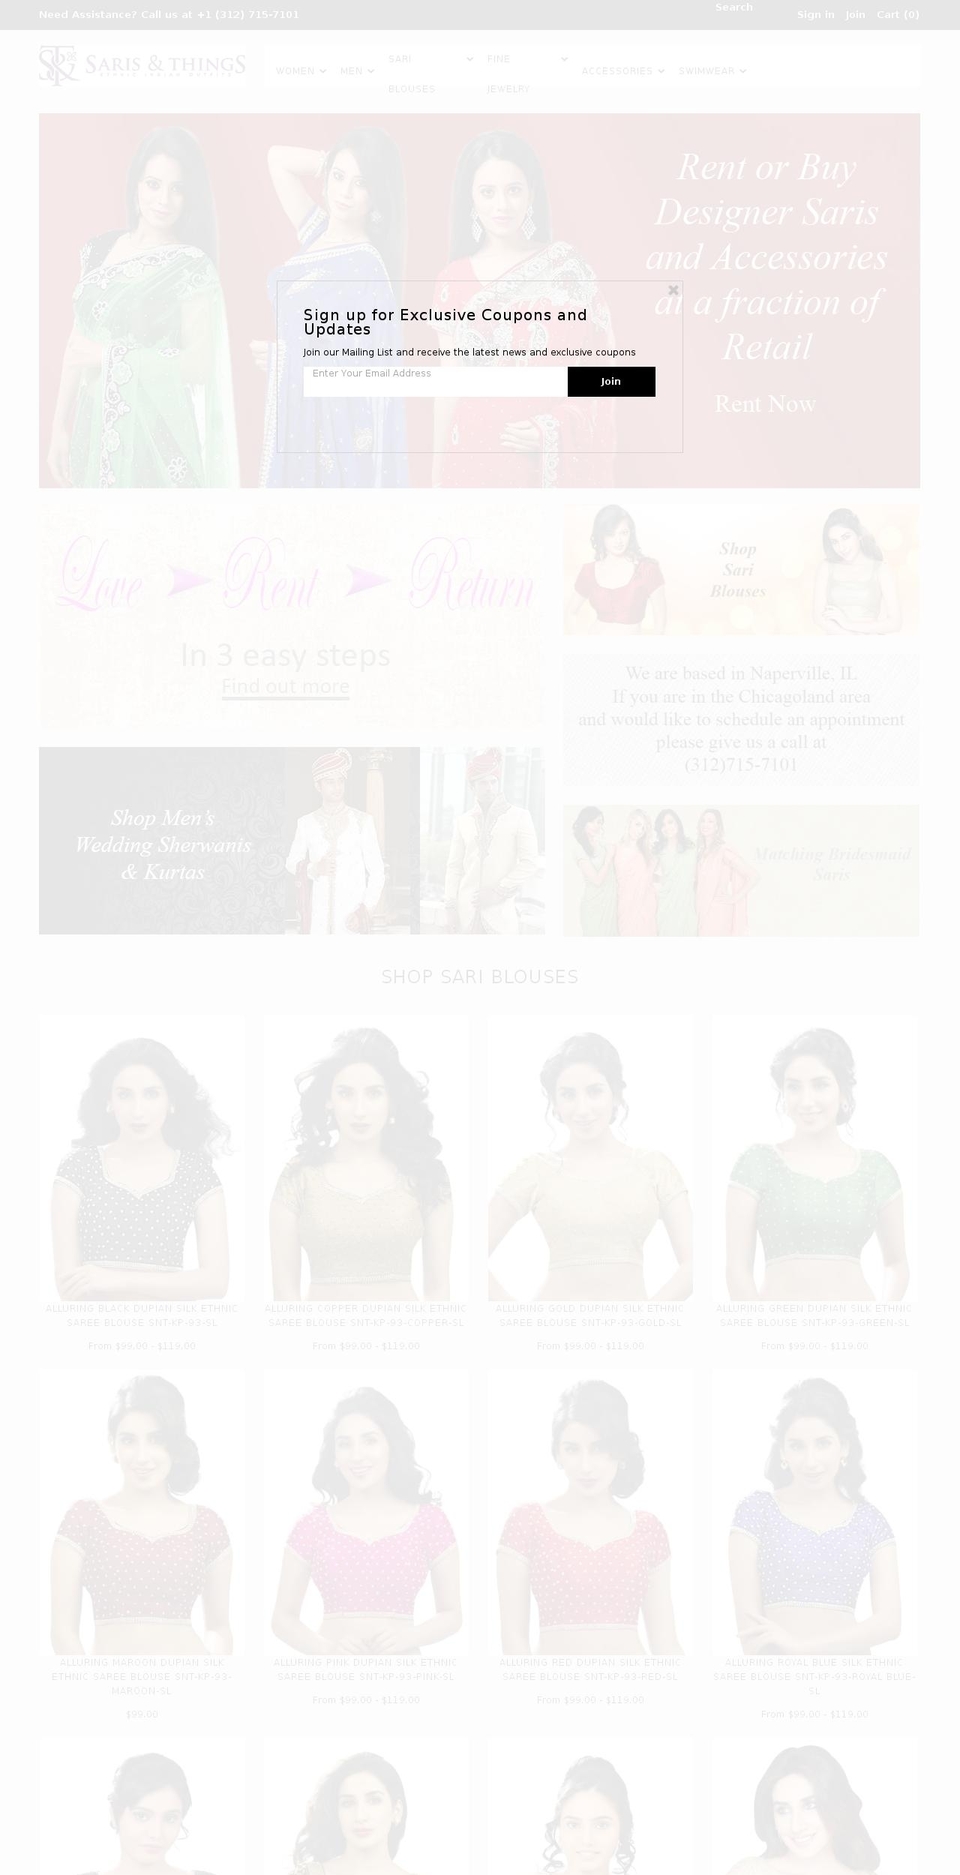 Galleria Shopify theme site example sarisandthings.com